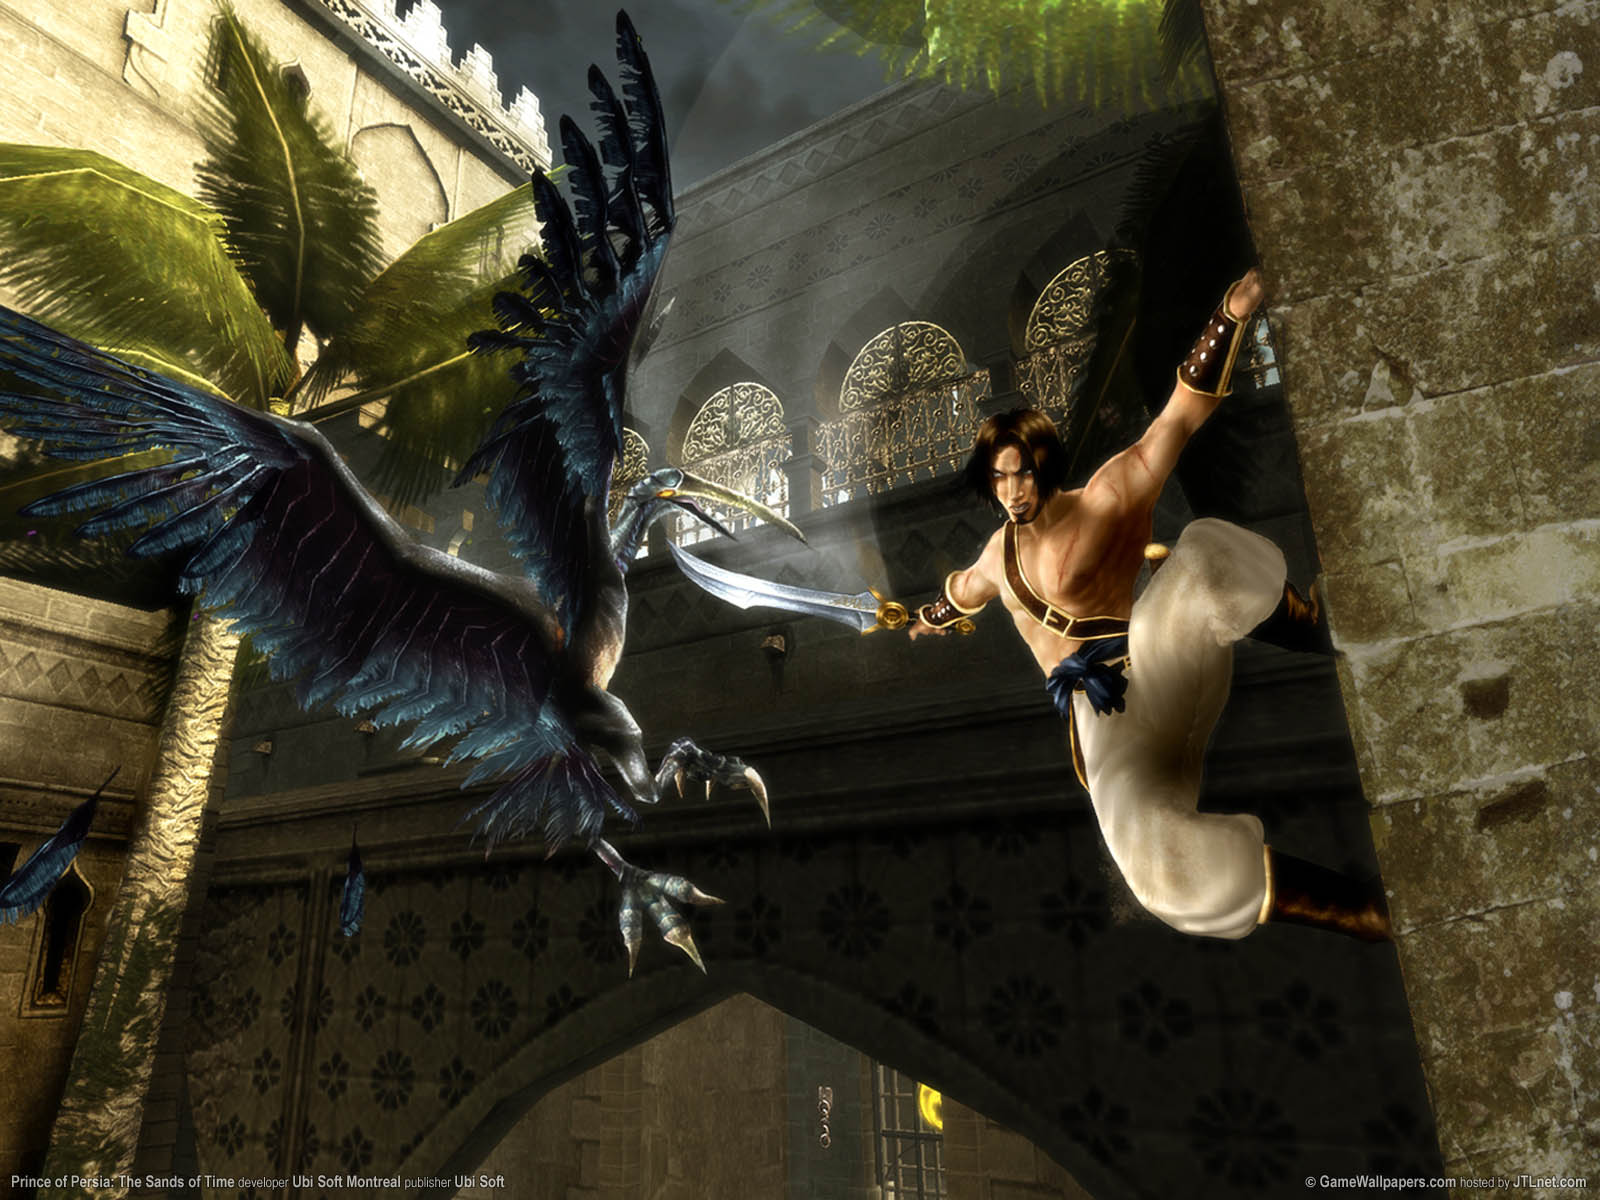 Poster of Prince of Persia The Sands of Time Remake Wallpapers